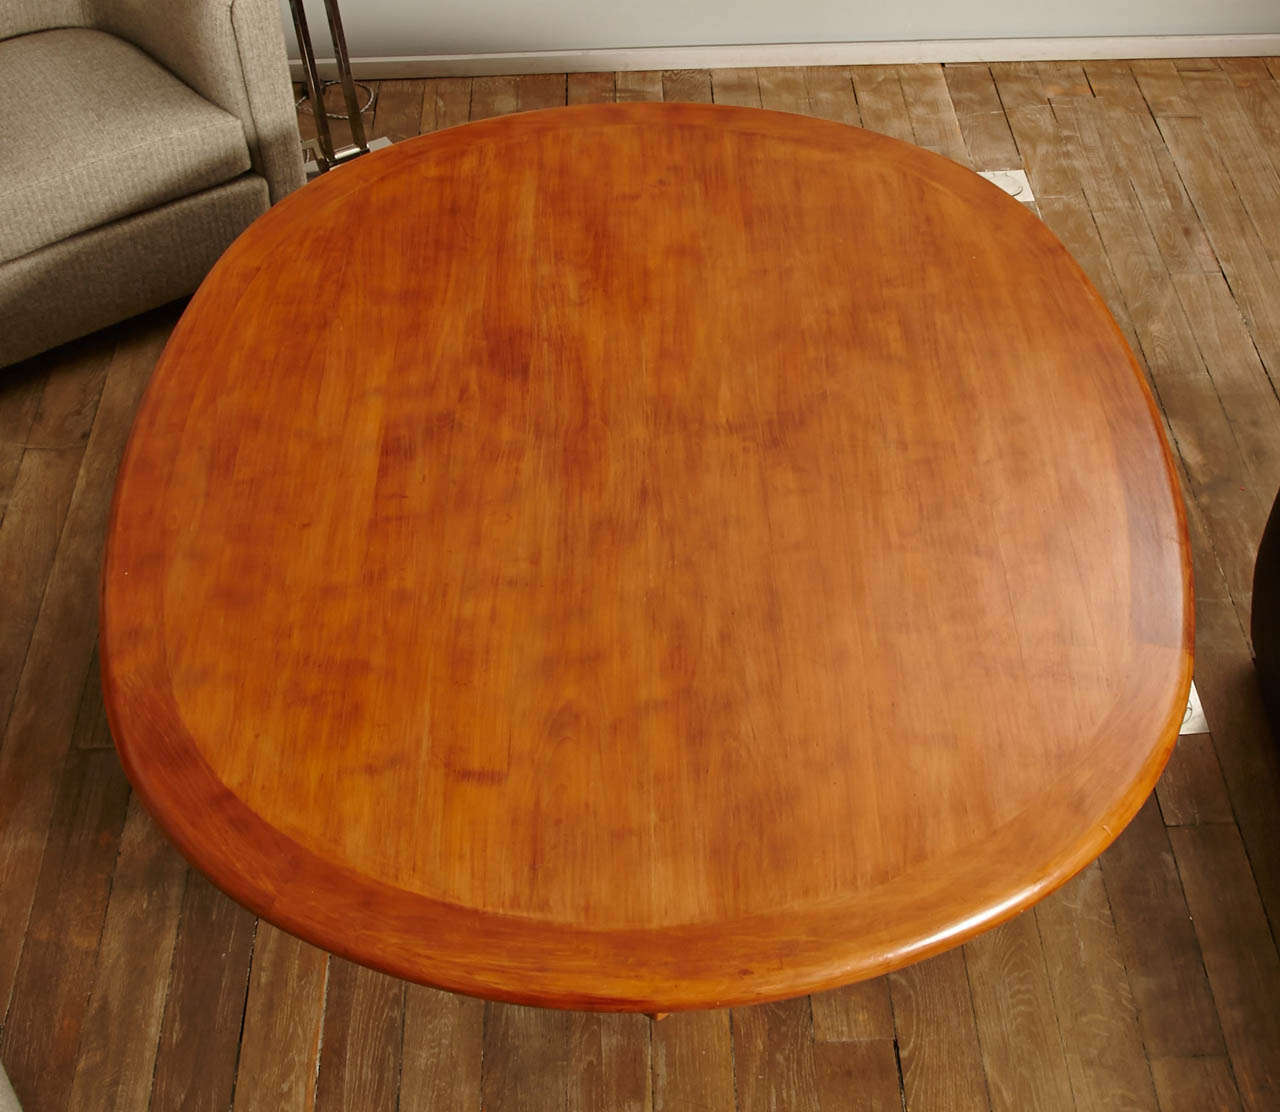 Mid-20th Century Large Coffee Table in Massive Cherry Wood, France circa 1960